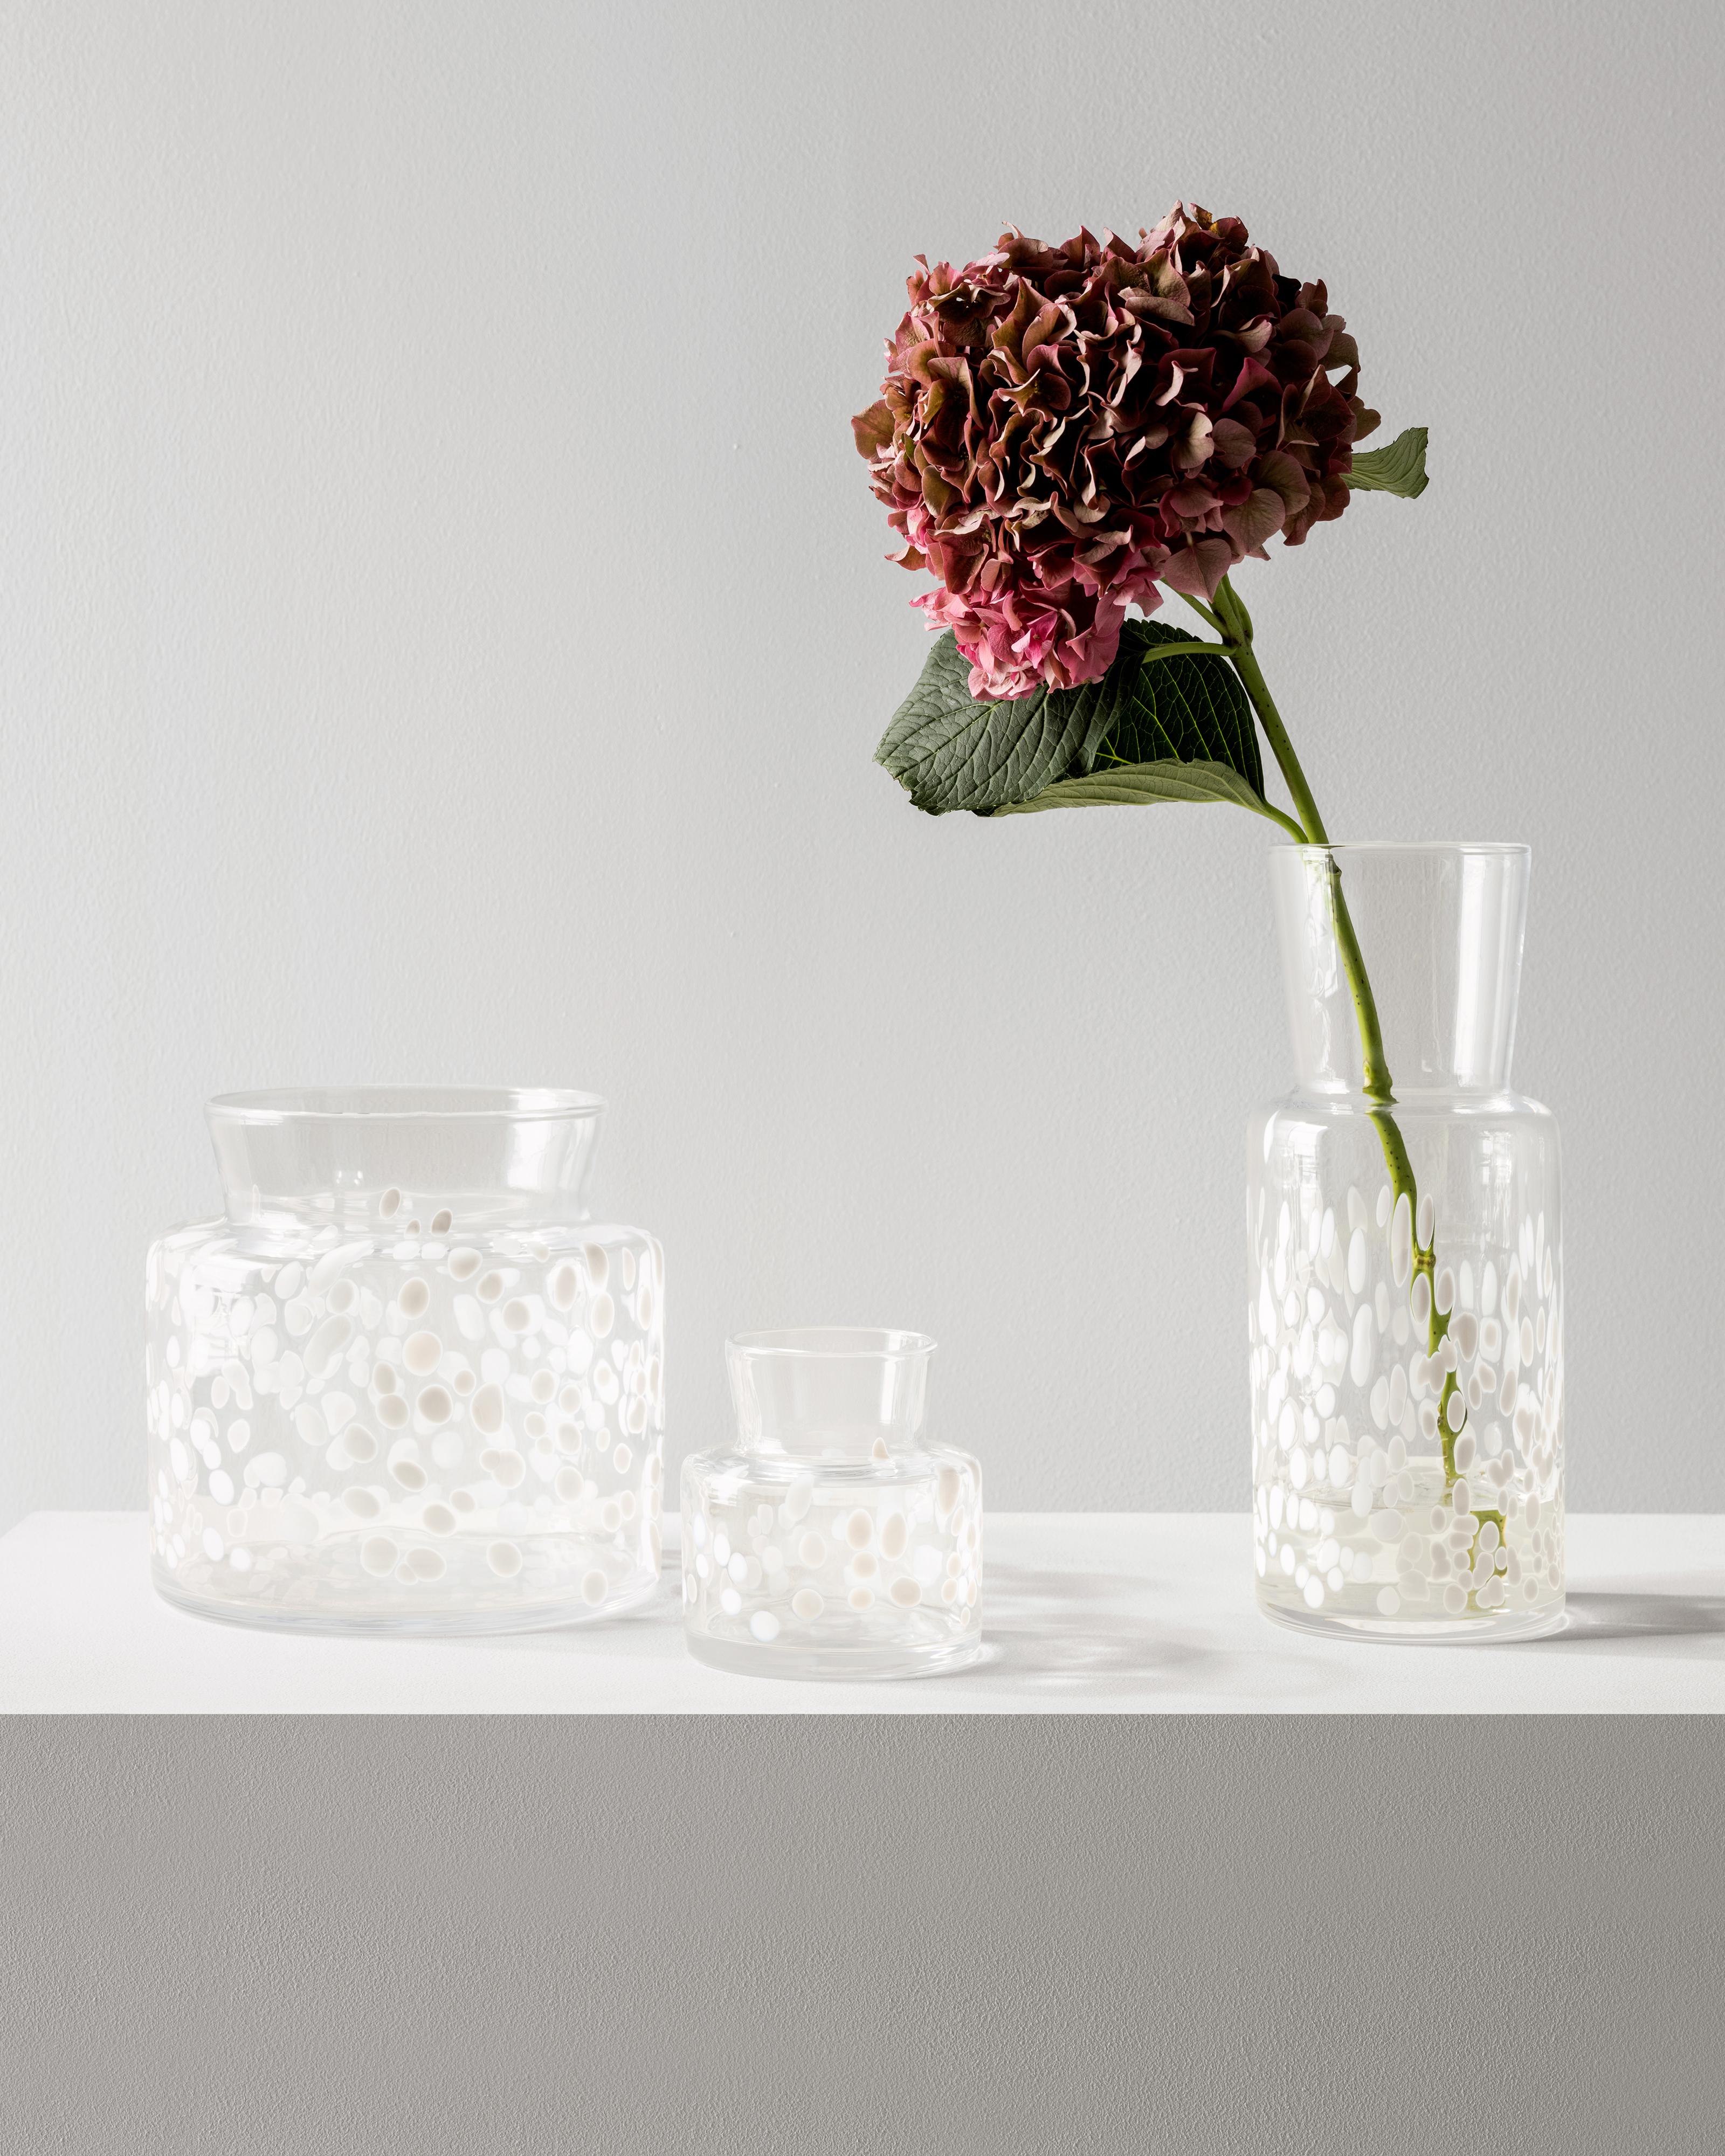 Meadow Winter is like a warm embrace, perfect for creating flower arrangements like a small meadow frozen in time. During the production the vases are rolled in crushed pieces of white glass, which makes each vase unique. The tall vase from Kosta